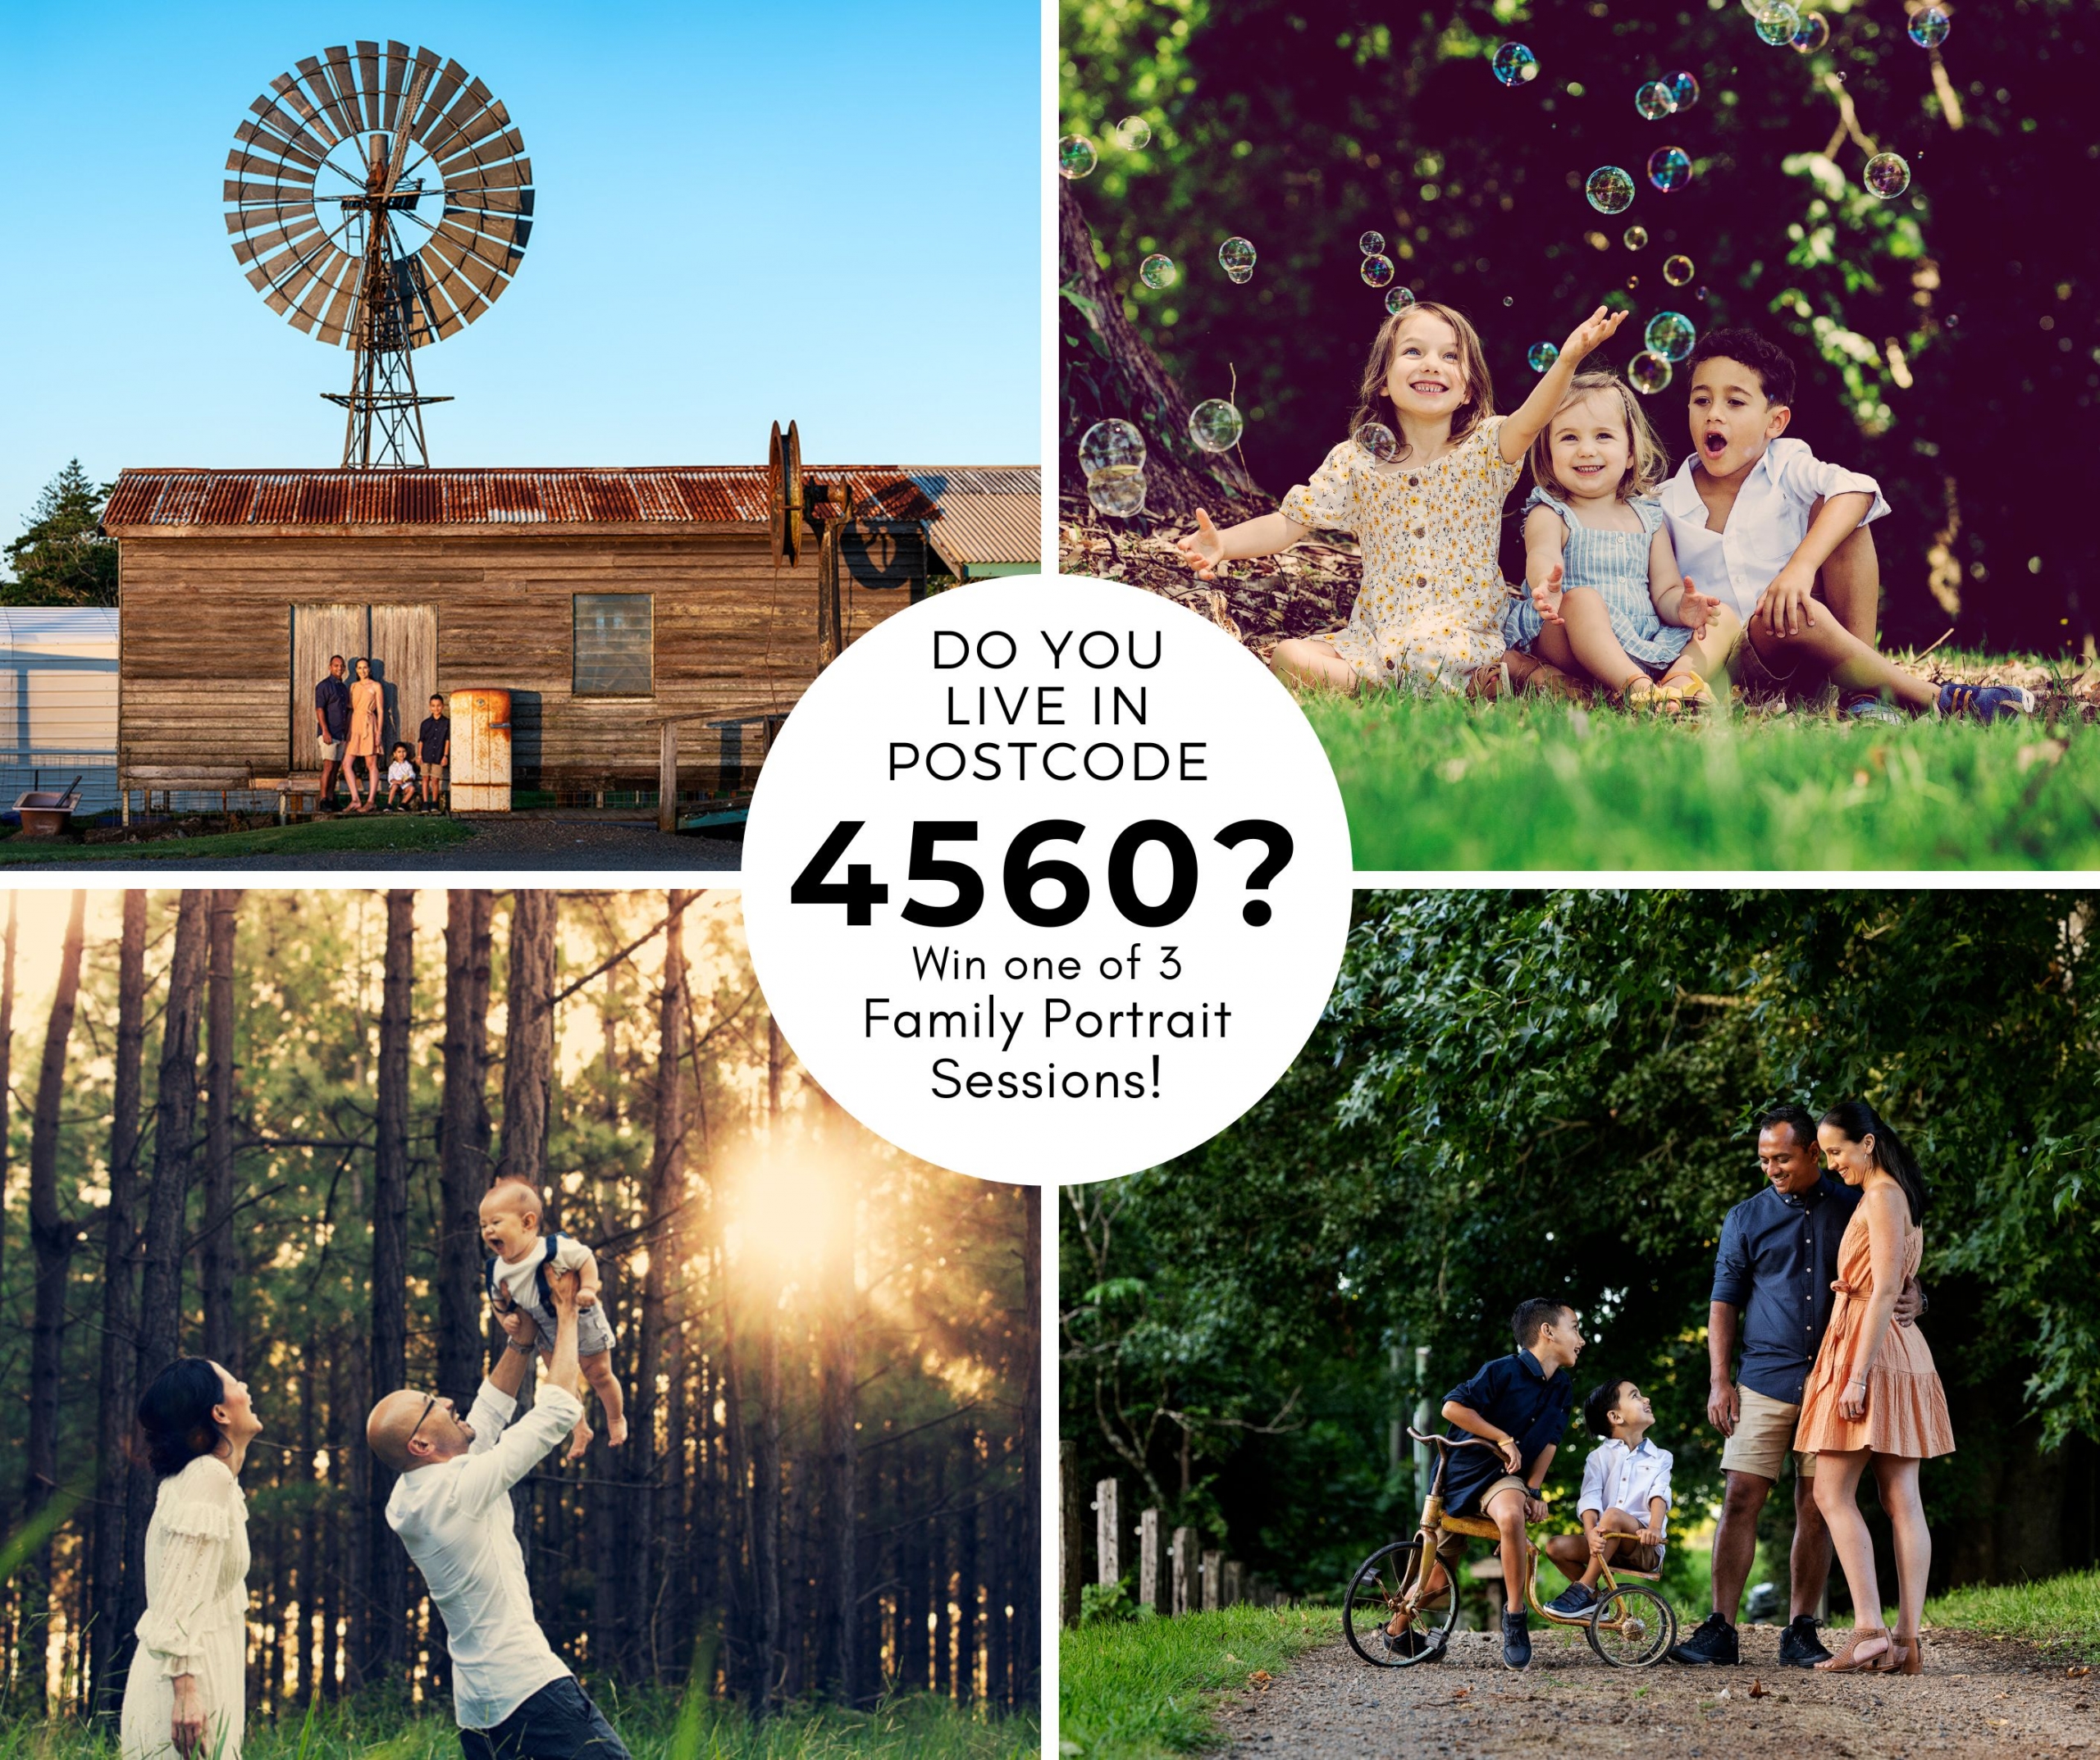 Do you live in Postcode 4560?